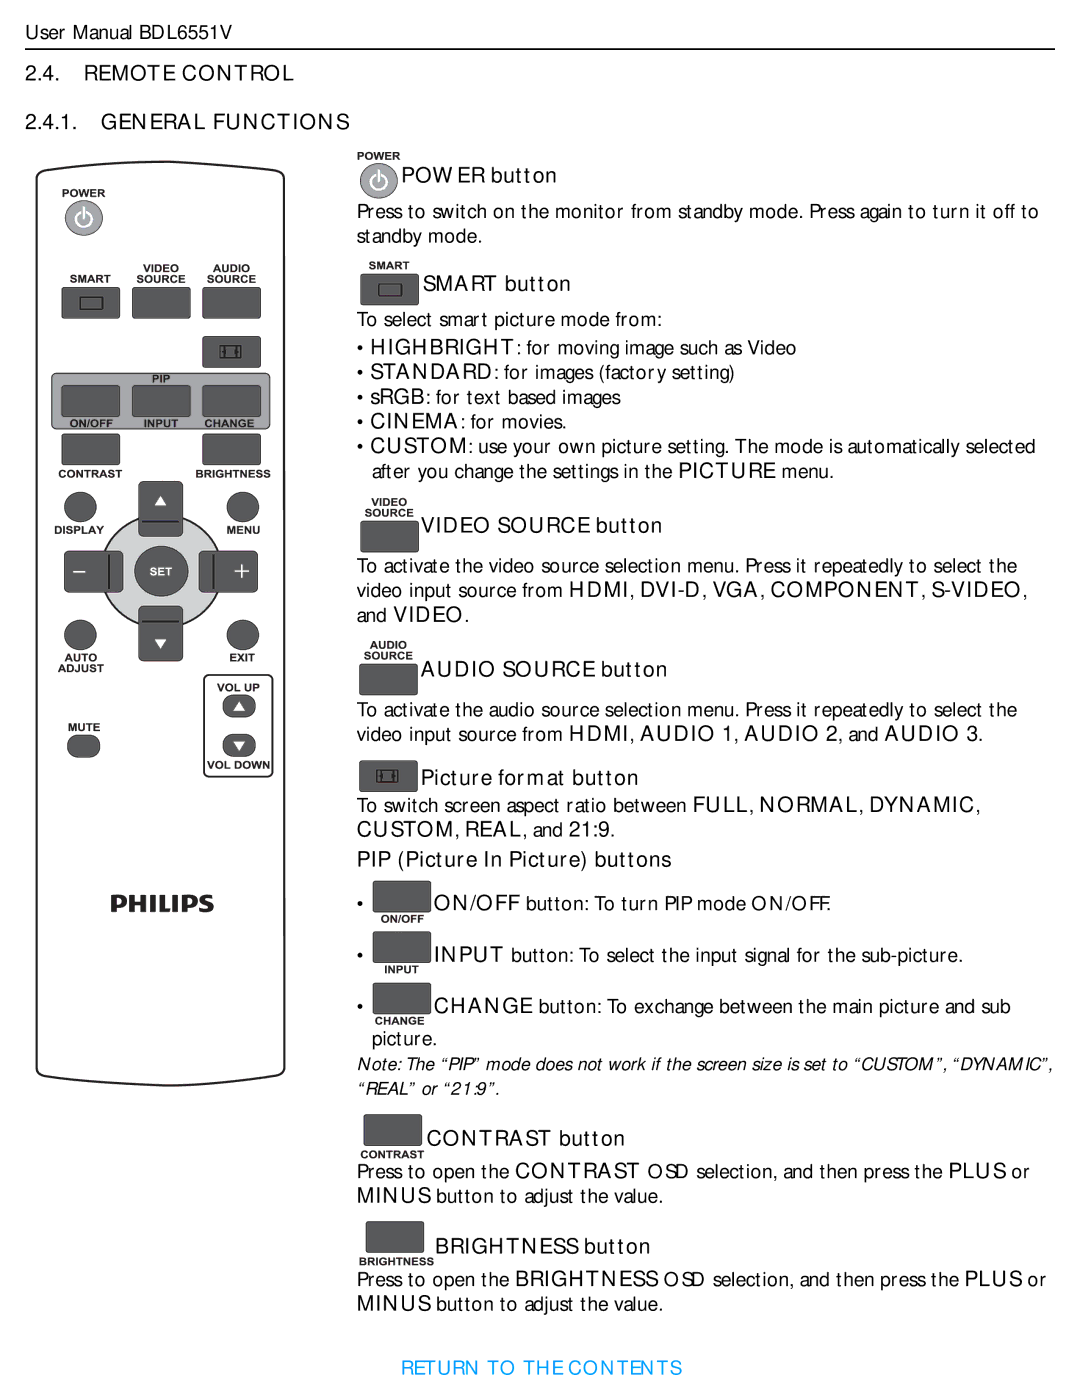 Philips BDL6551V user manual Remote Control General Functions 